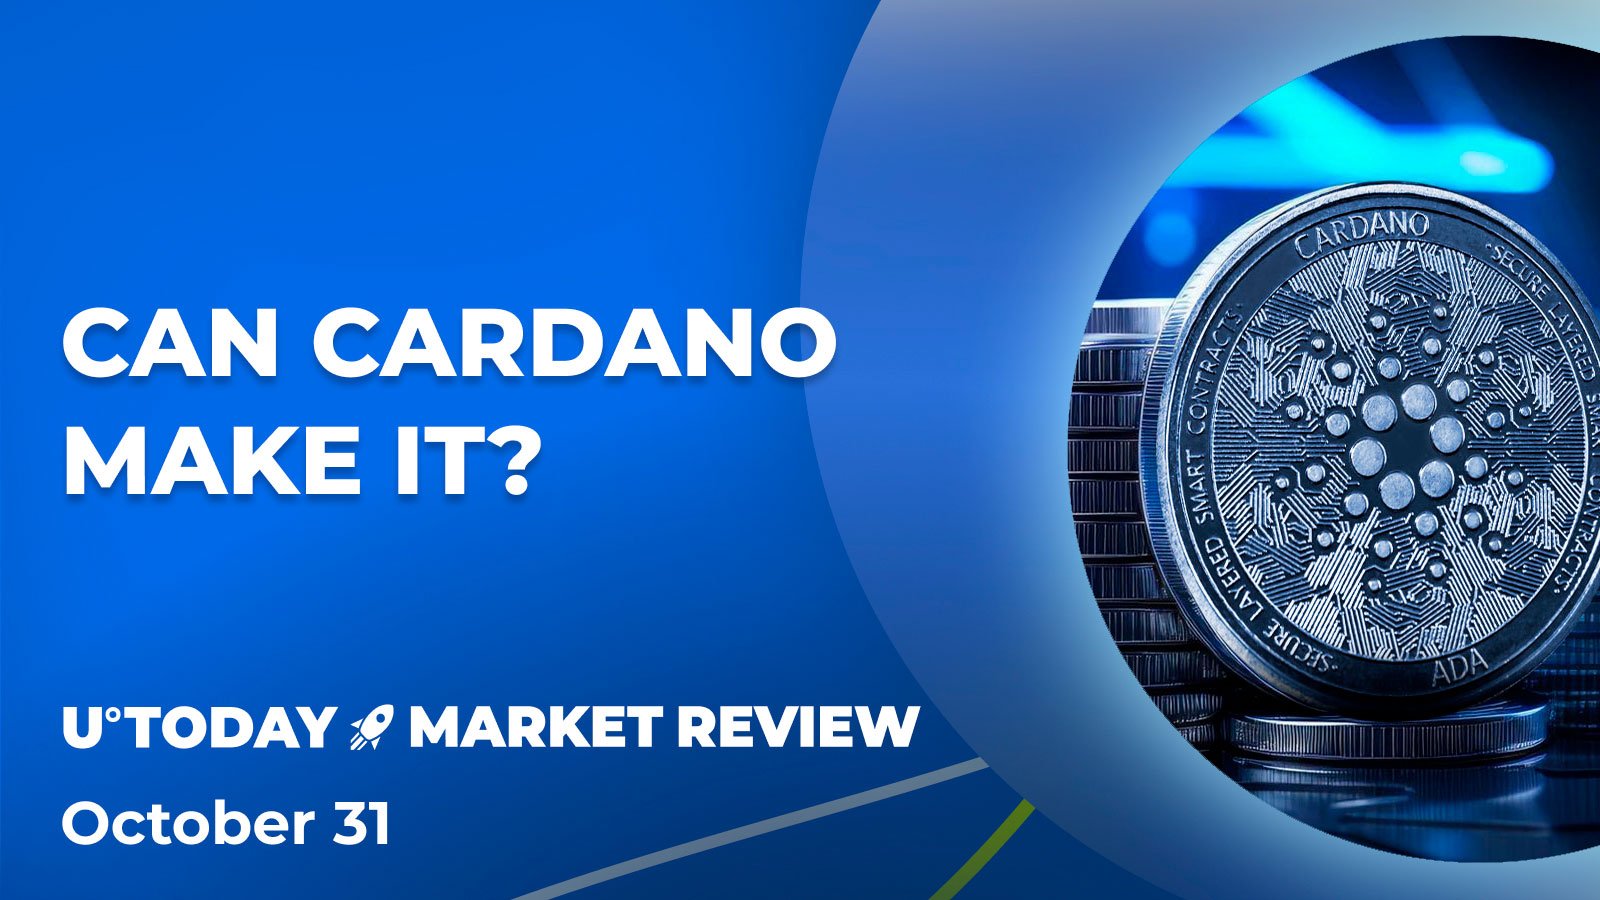 Cardano (ADA) Path to $0.5: Perspectives, Scenarios and Real Chances